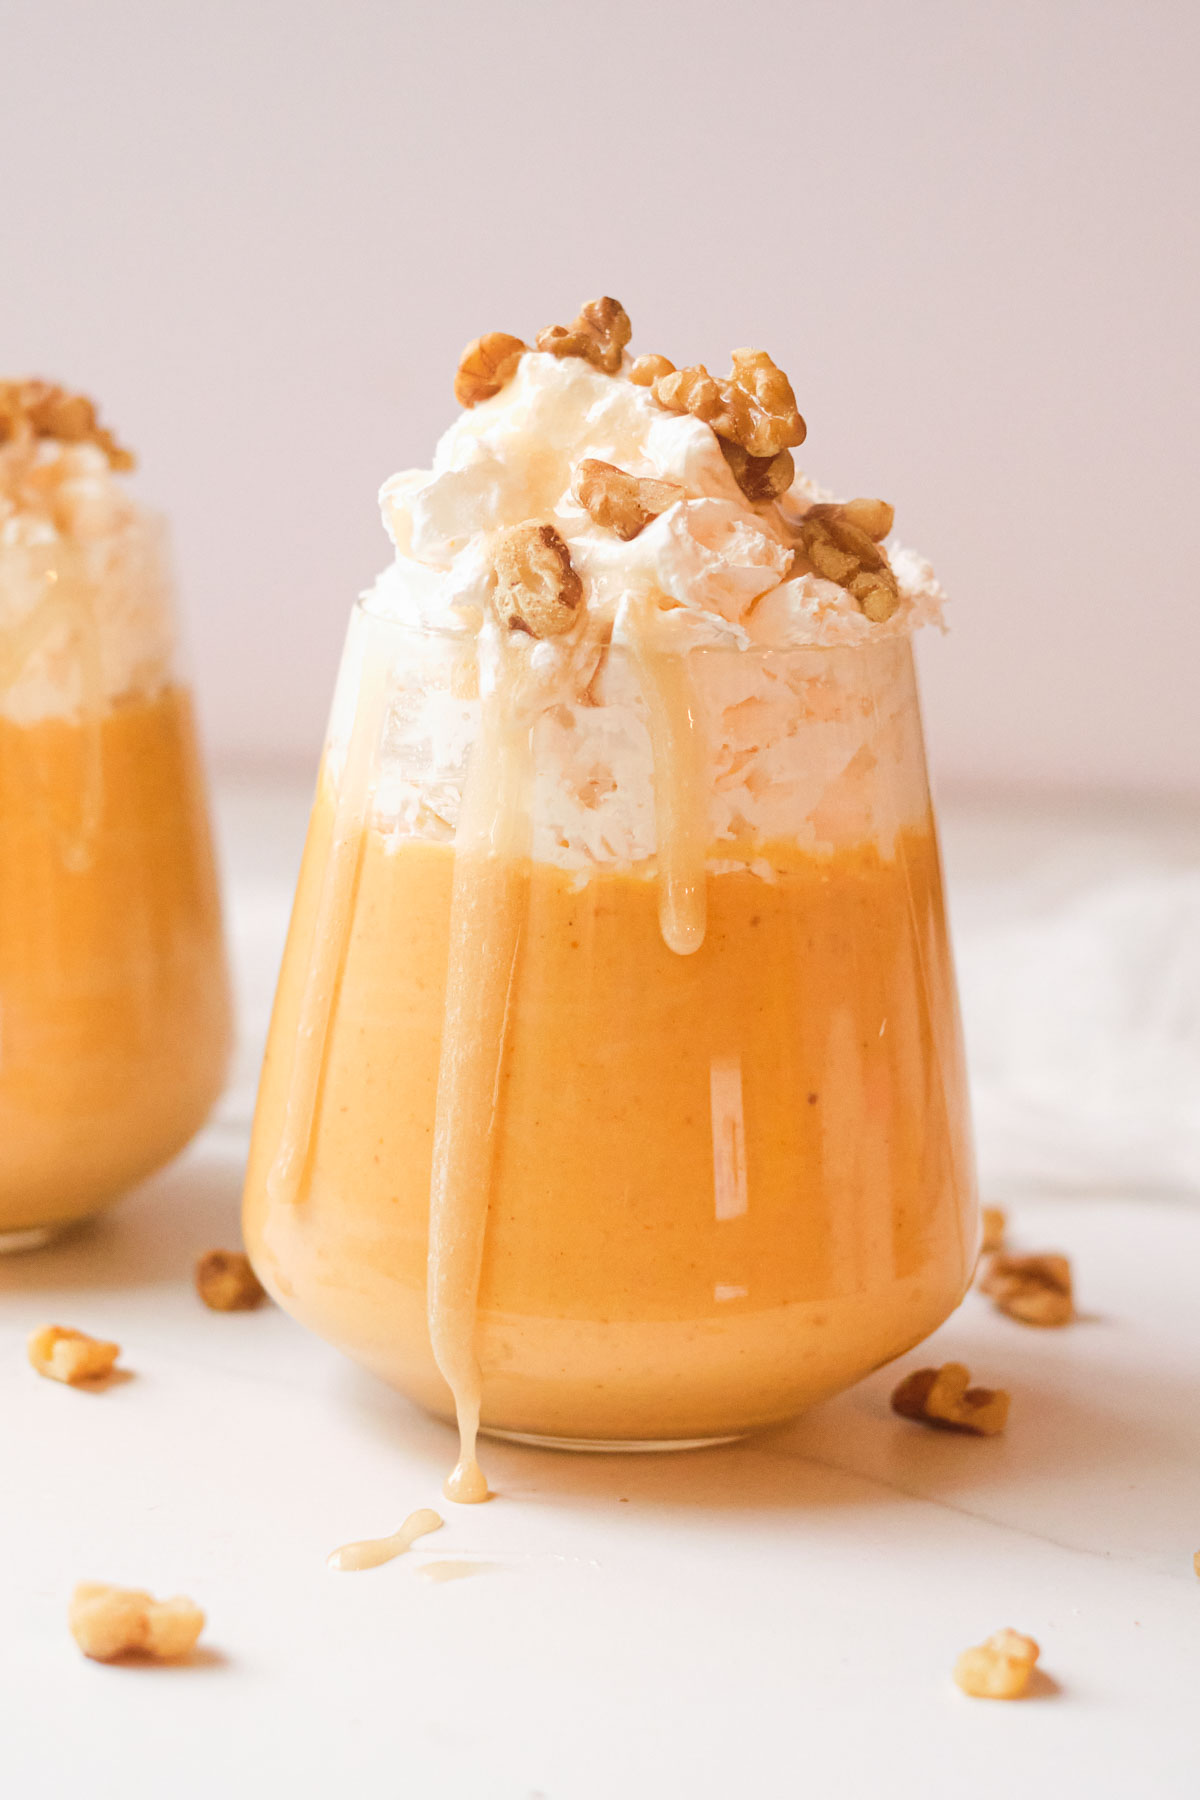 the finished pumpkin smoothie topped with whipped cream and nuts